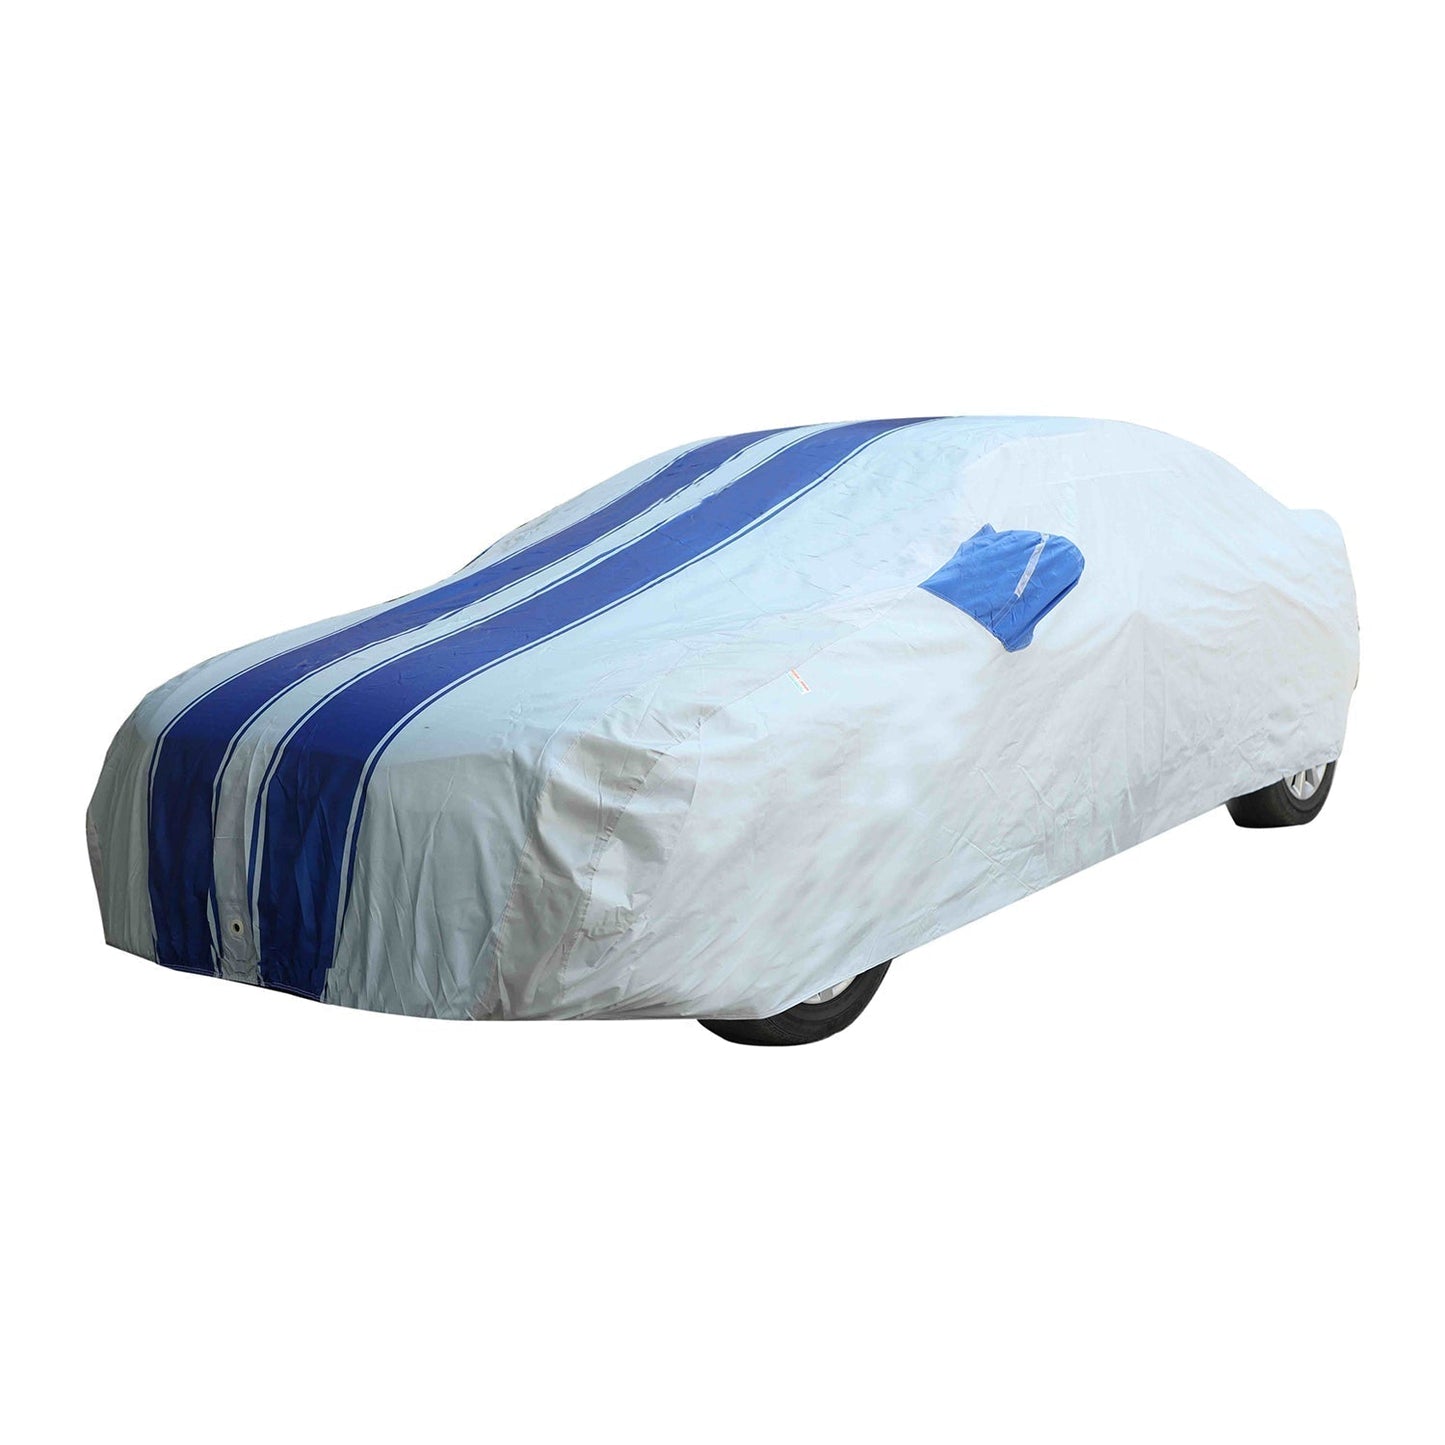 Oshotto 100% Blue dustproof and Water Resistant Car Body Cover with Mirror Pockets For Maruti Suzuki Sx4